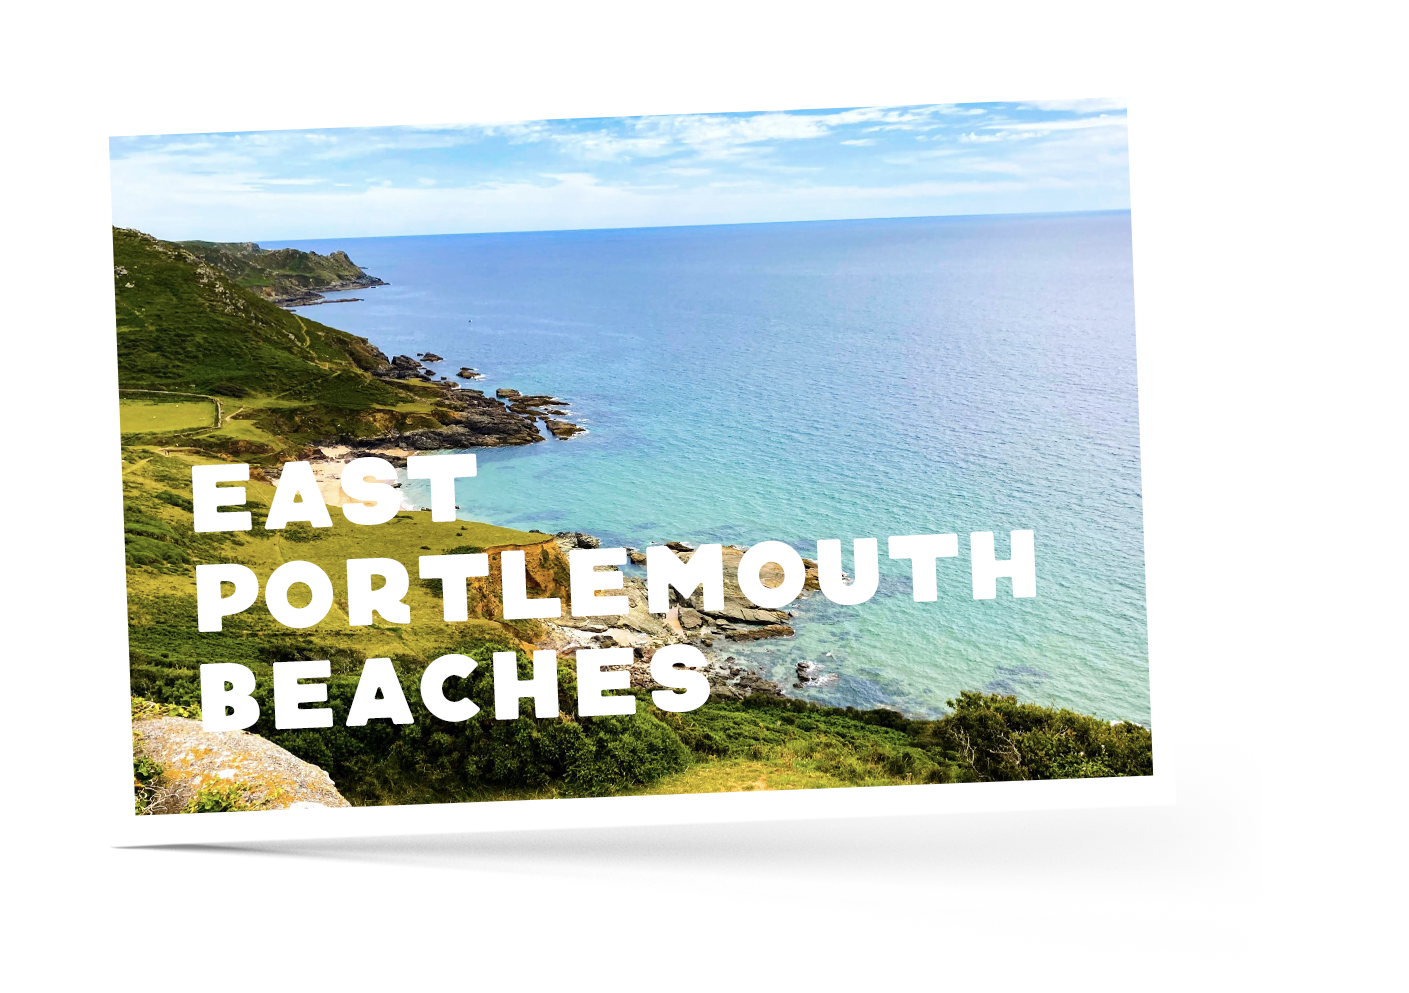 Grassy topped cliffs overlooking East Portle Mouth Beach and bright blue sea